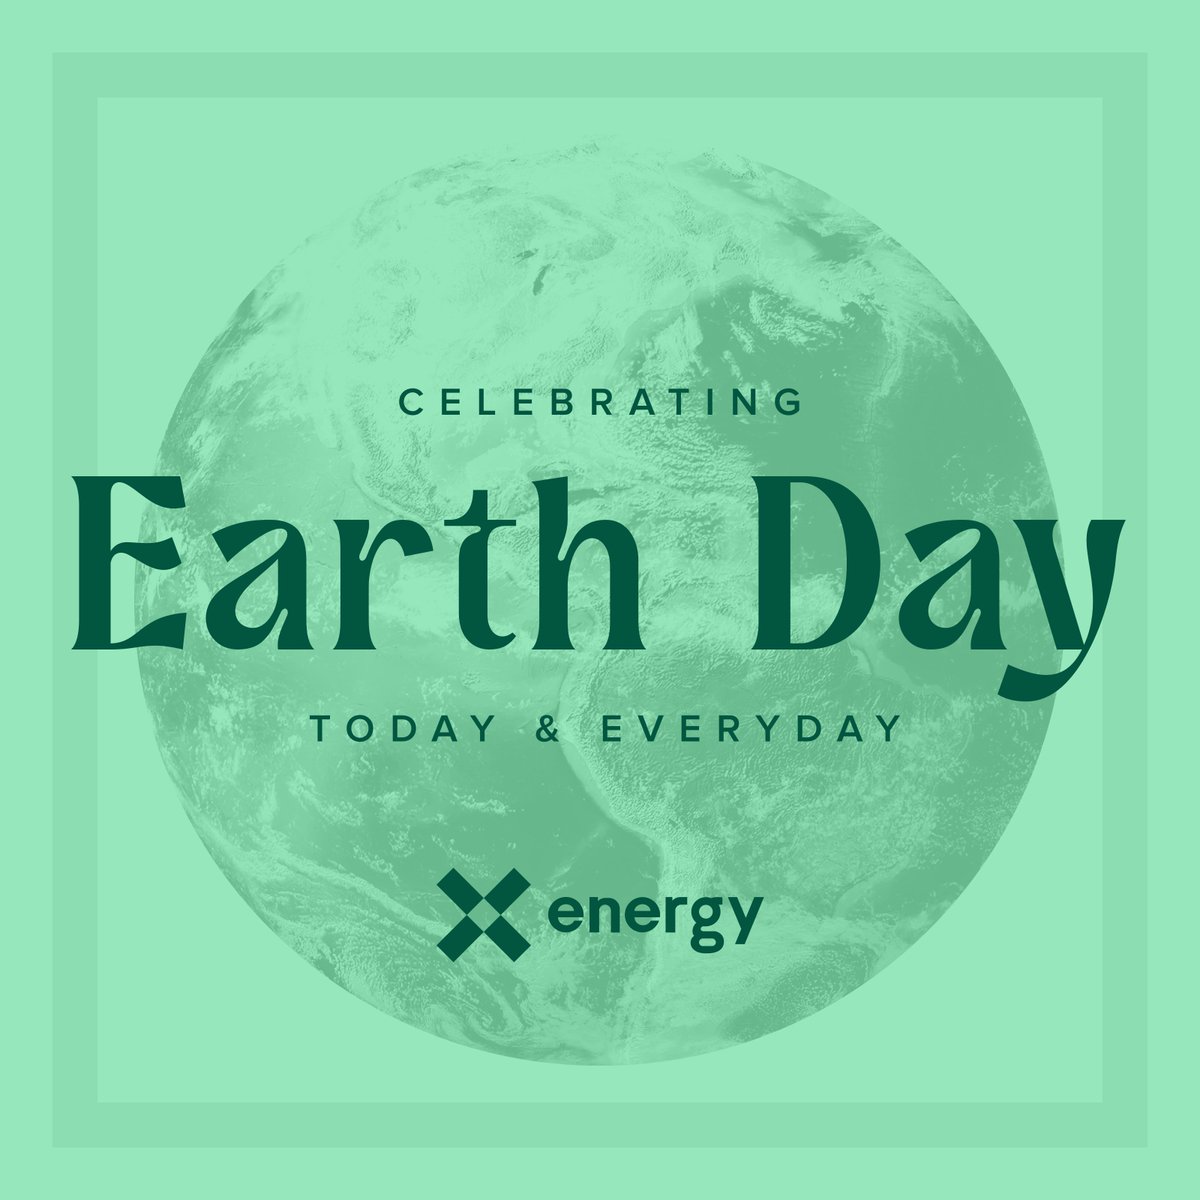 🌎 Earth Day is not only a moment to celebrate our planet, it's a recommitment to the actions that make a real impact. X-energy's journey toward a cleaner, safer, and more sustainable world goes beyond Earth Day—it's woven into the fabric of everything we do. We believe in 💡